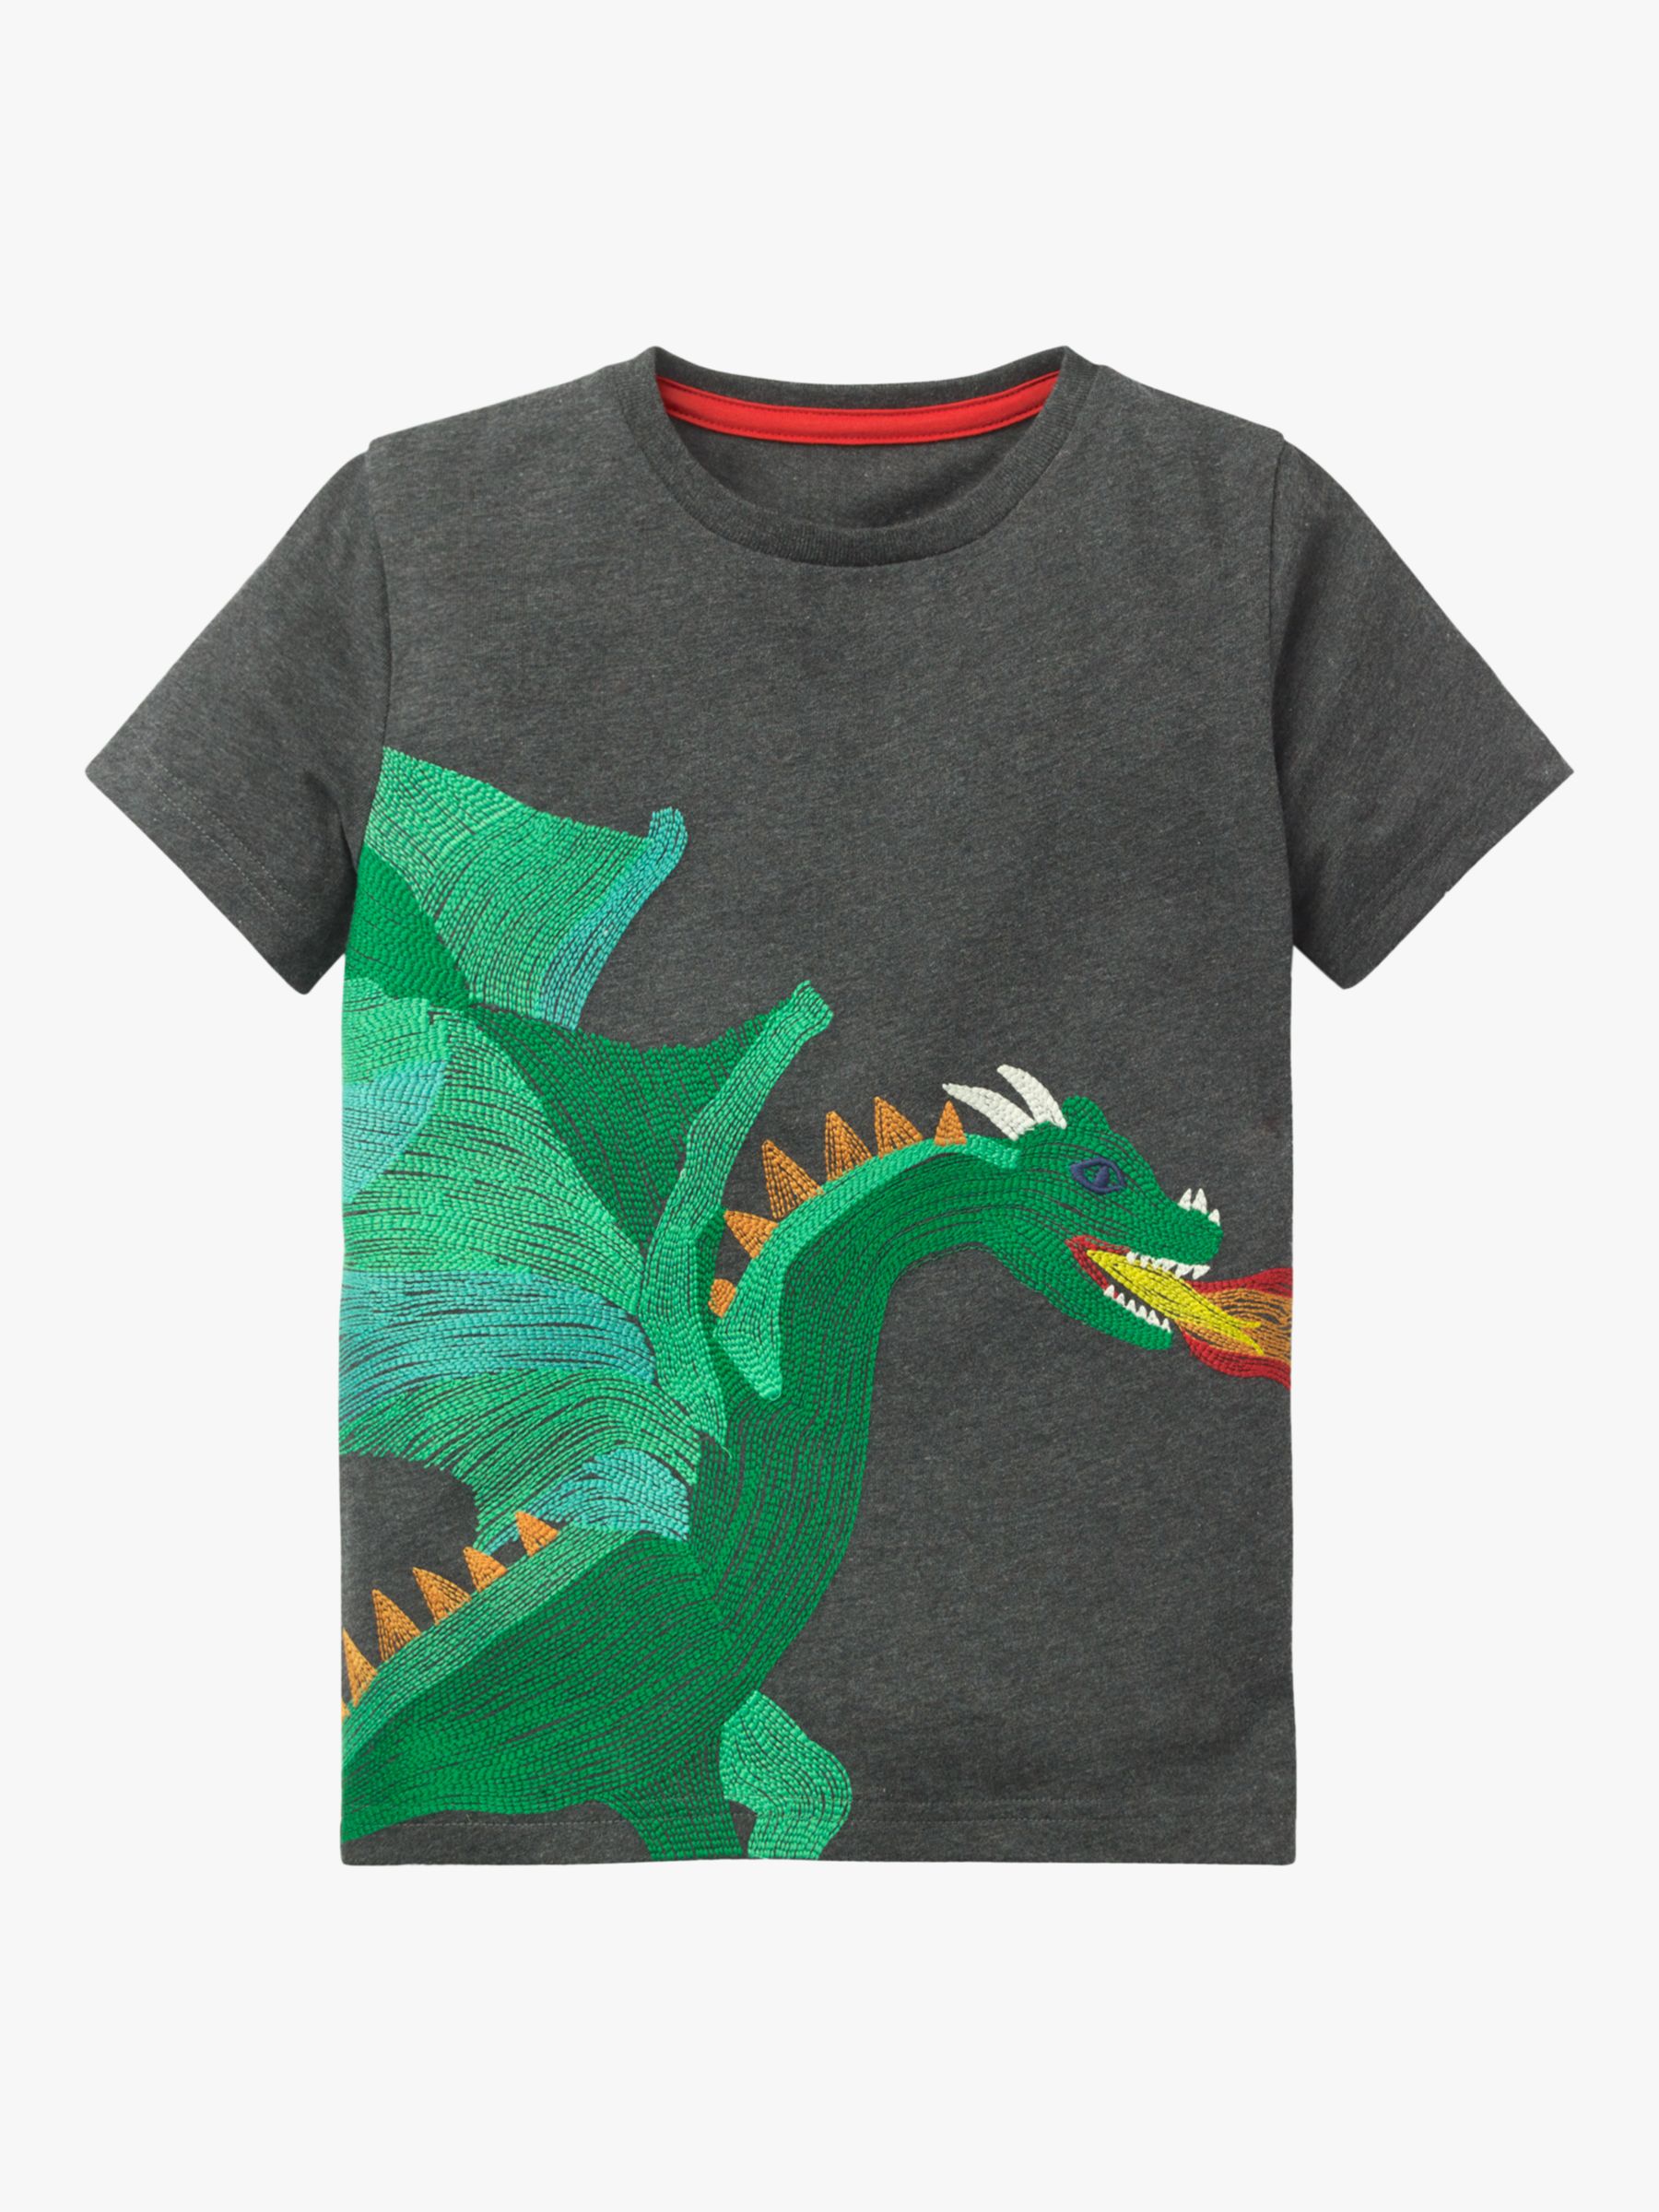 Image of Mini Boden Boys Superstitch Dragon Cotton TShirt Charcoal Grey